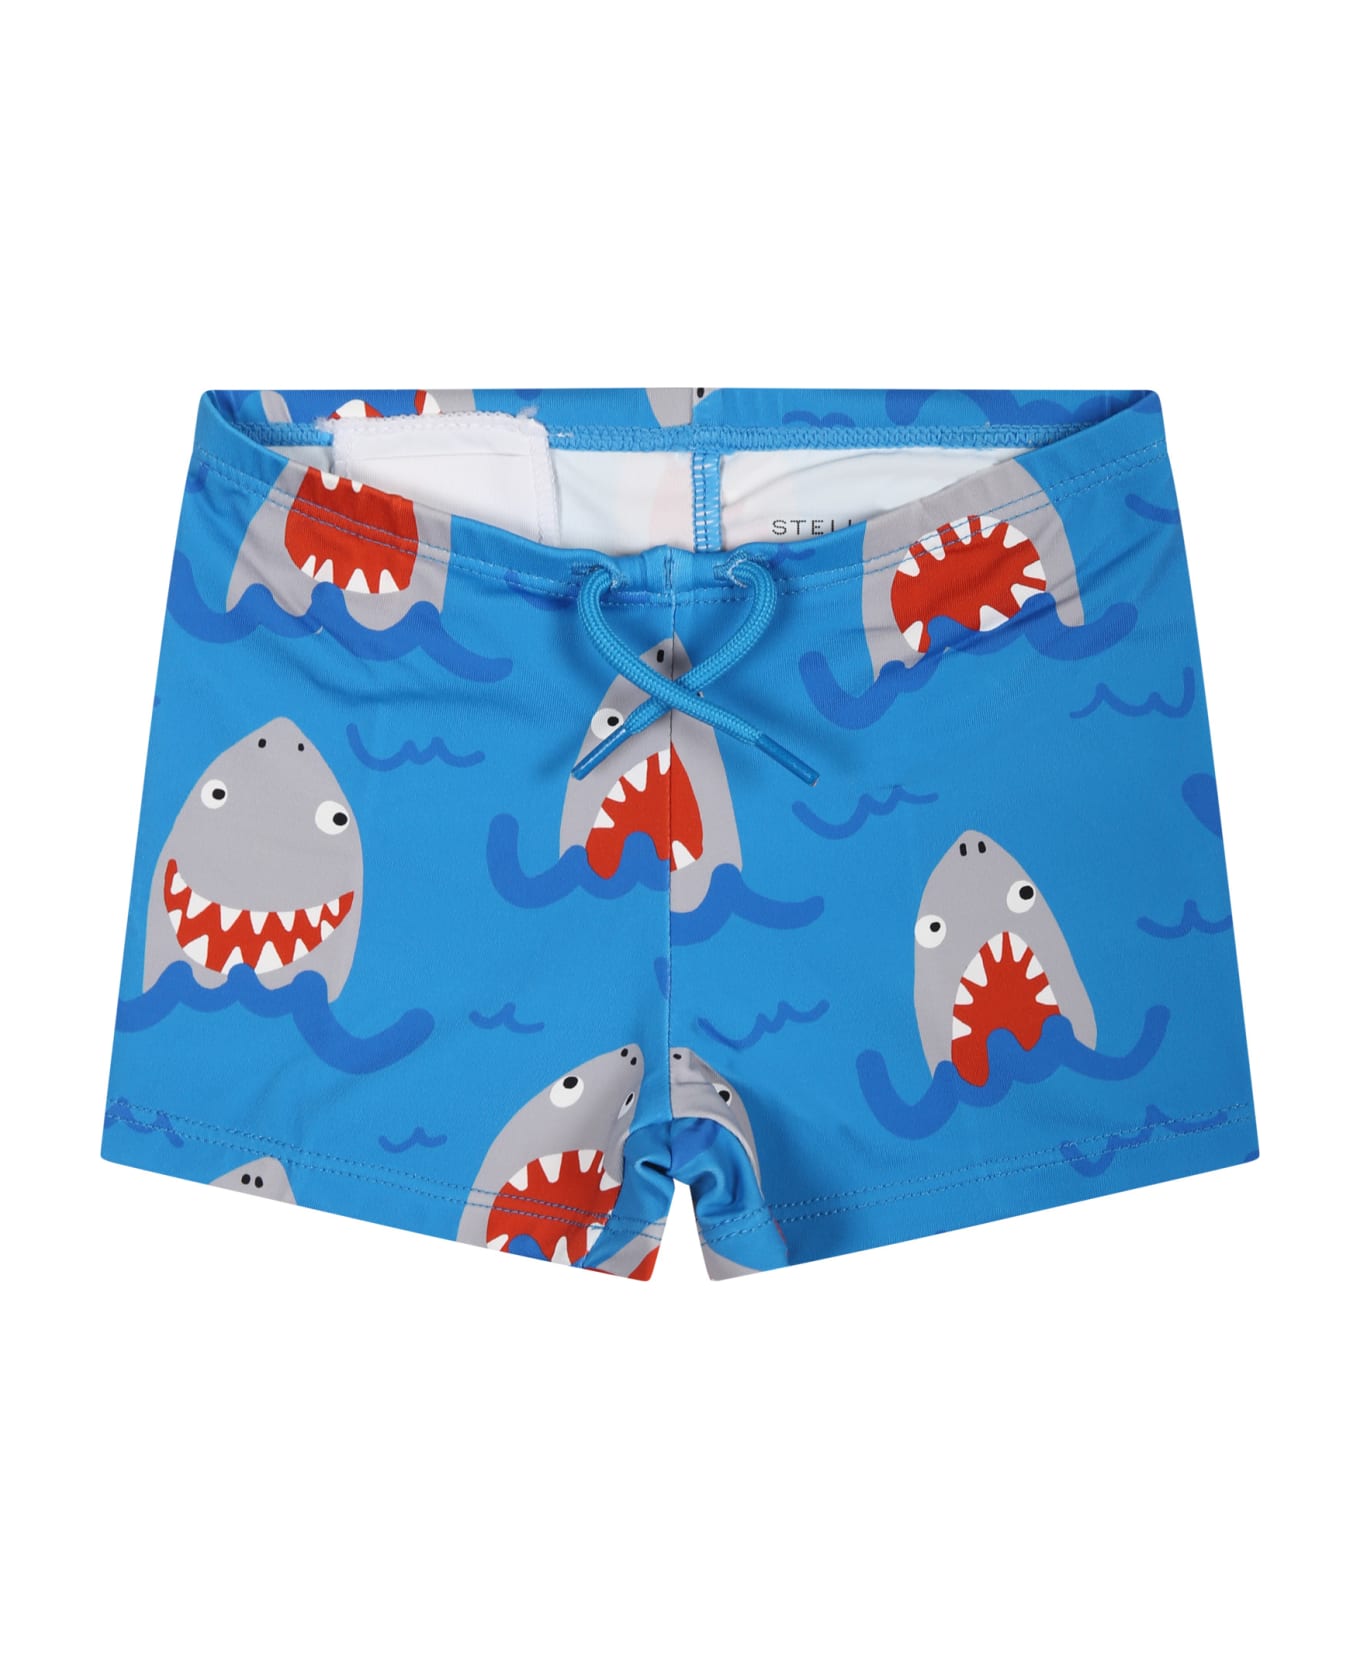 Stella McCartney Kids Light Blue Boxer Shorts For Baby Boy With All-over Shark Print - BLUE 水着